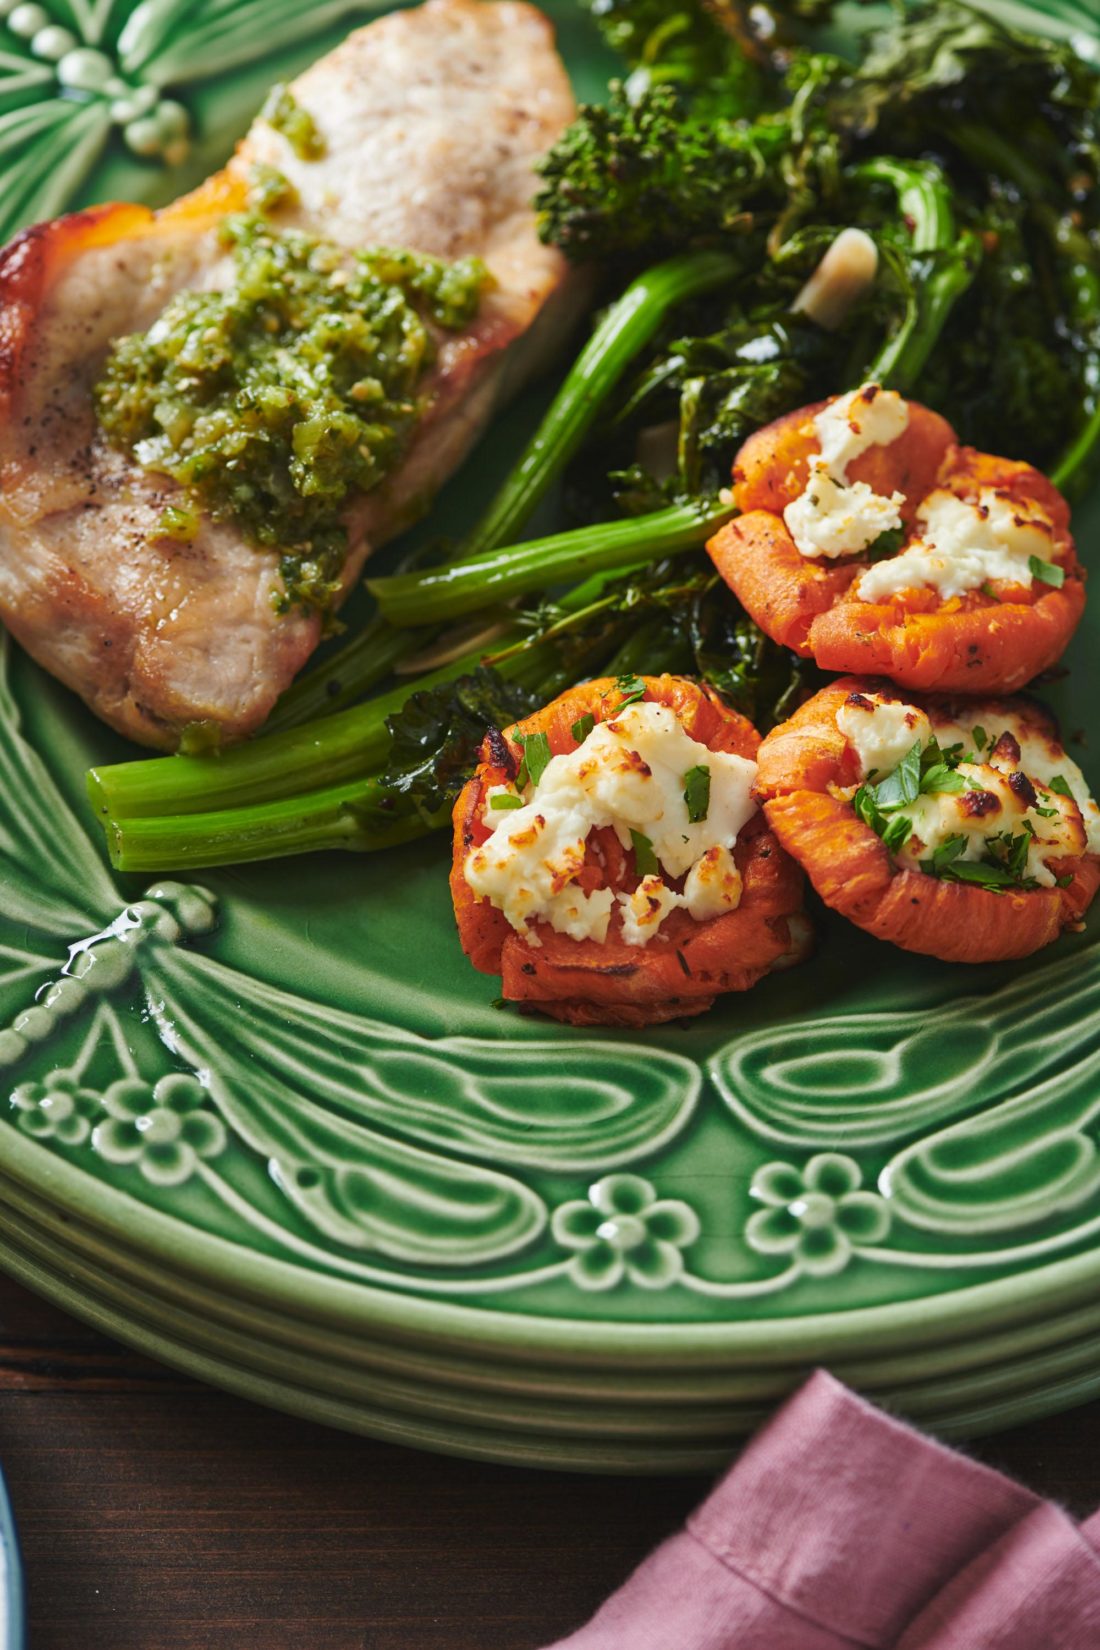 Pork Chops with Italian Salsa Verde, broccoli rabe, and sweet potatoes on a green plate.